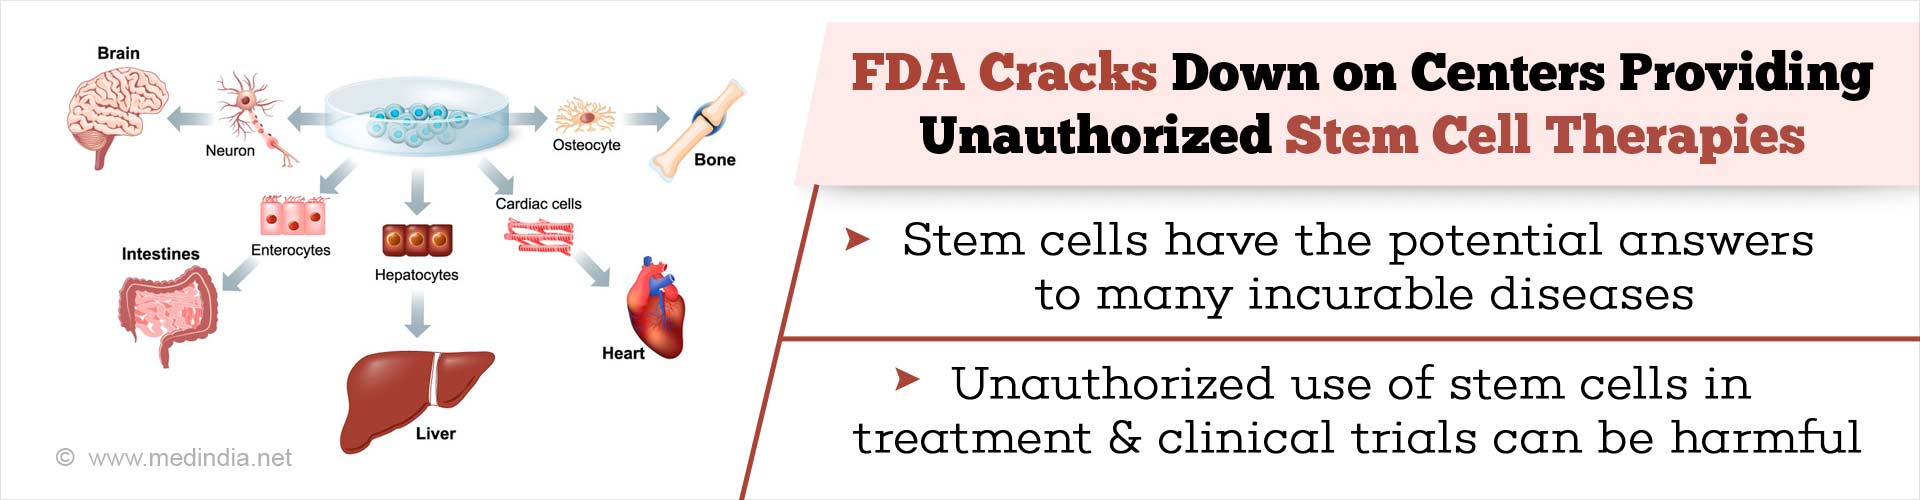 FDA cracks down on centers providing unauthorized stem cells therapies
- stem cells have the potential answers to many incurable diseases
- Unauthorized use of stem cells in treatment & clinical trials can be harmful